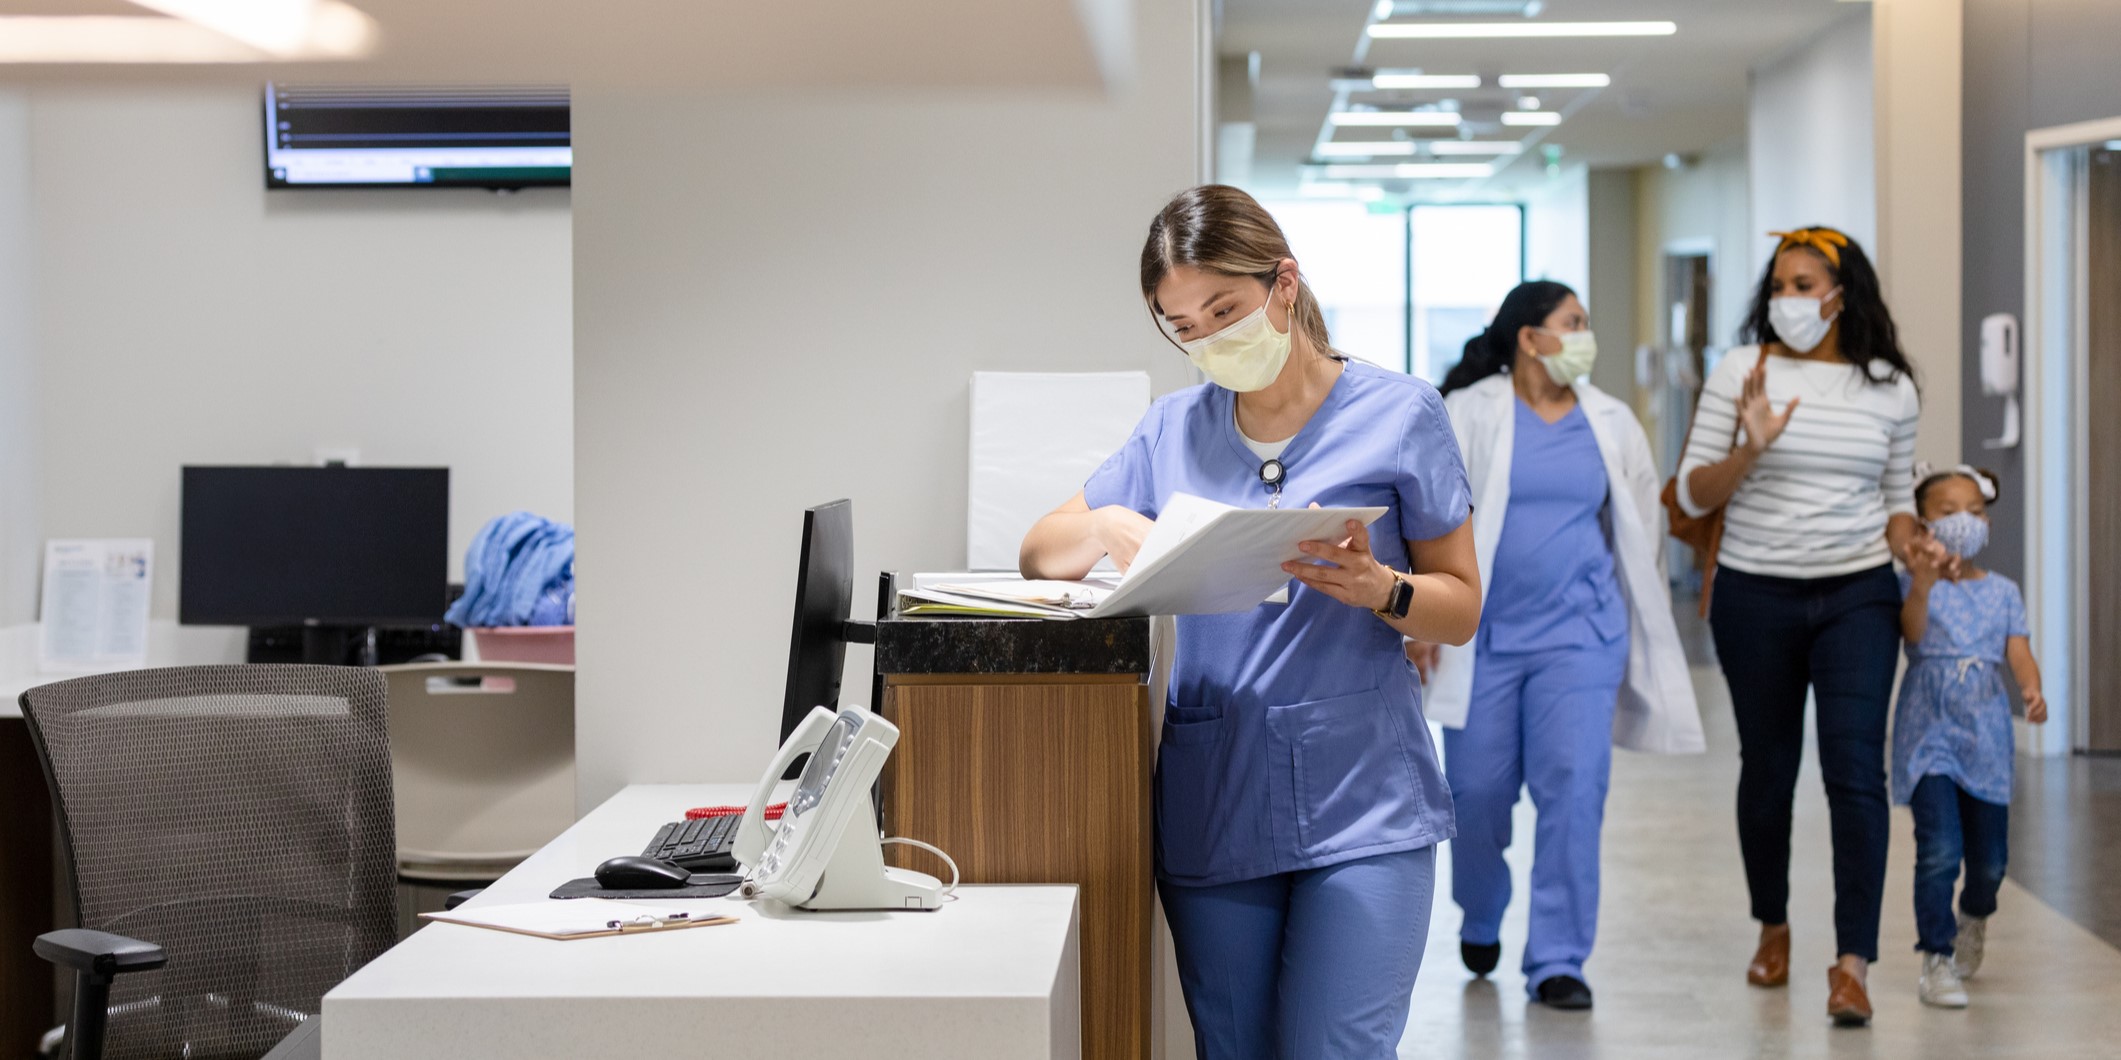 The nurses said they were promised well-paying jobs in the UK, but have not got them. (iStockPhoto/Representational image)